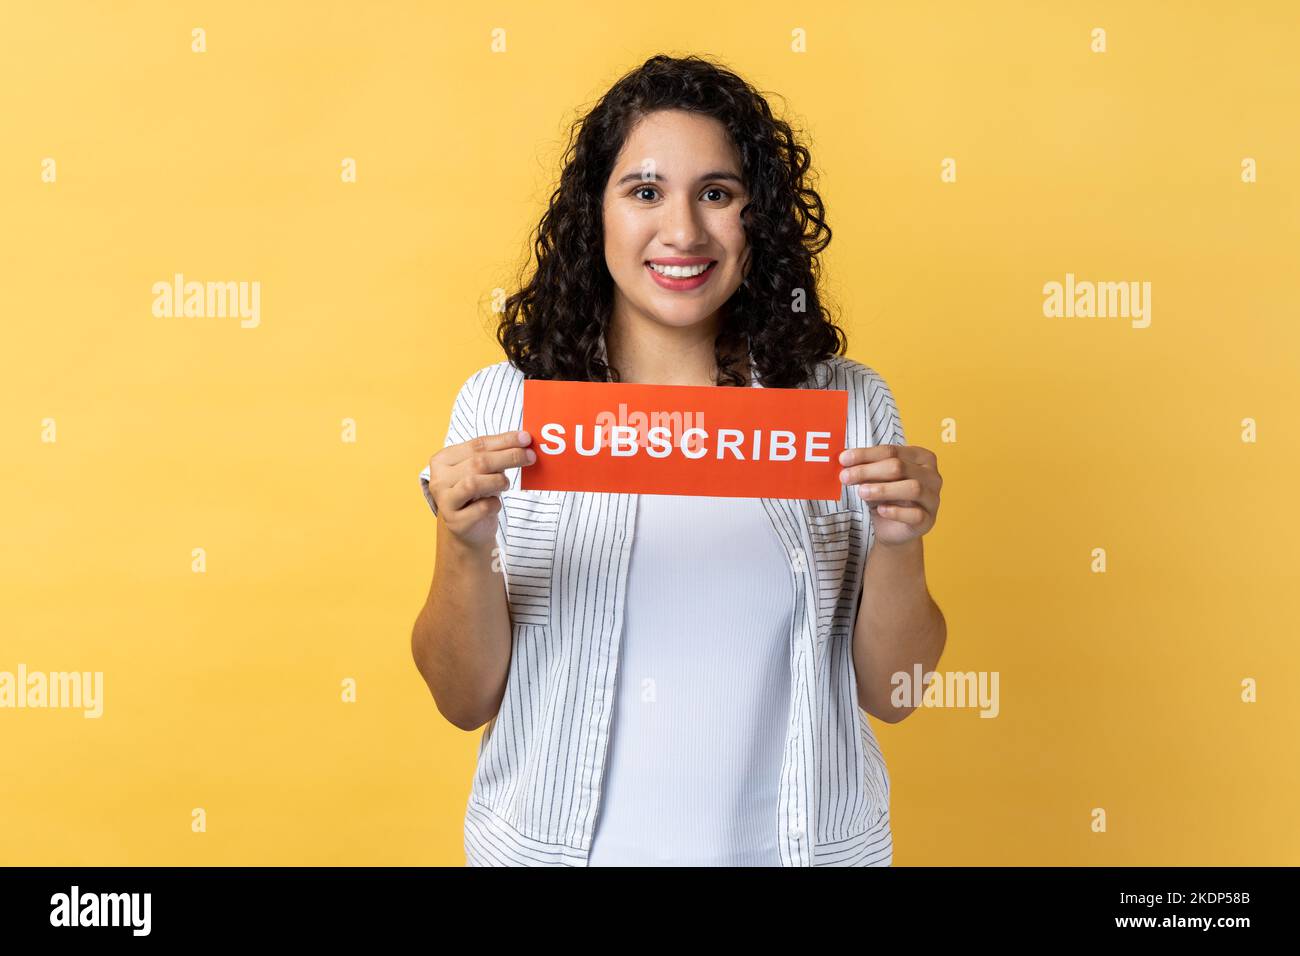 Portrait of happy smiling positive woman with dark wavy hair holding red card with subscribe inscription, asking to follow her blog. Indoor studio shot isolated on yellow background. Stock Photo